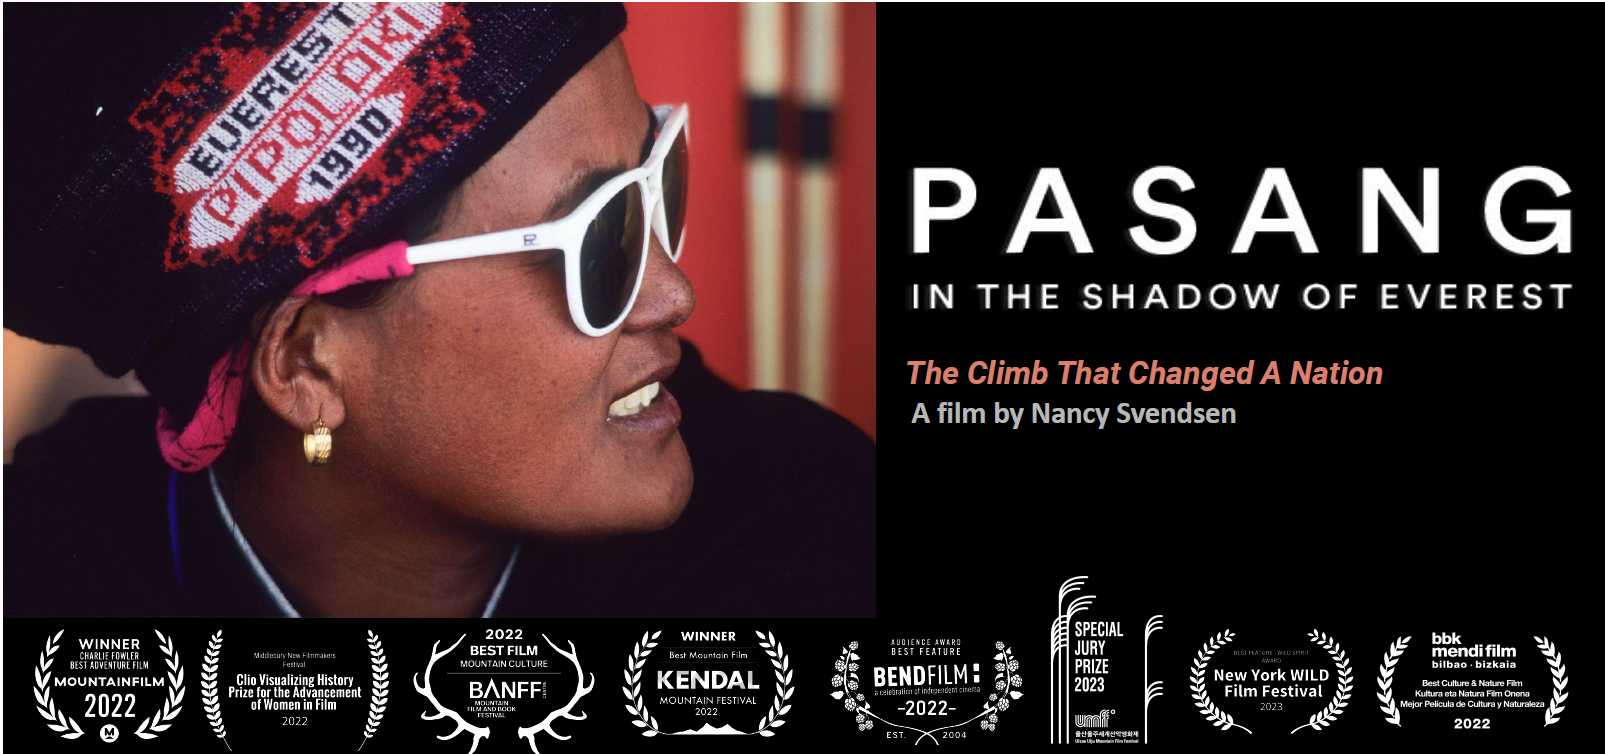 PASANG: IN the Shadow of Everest is available for Speaking engagments for private organizations, companies, and corporate events.